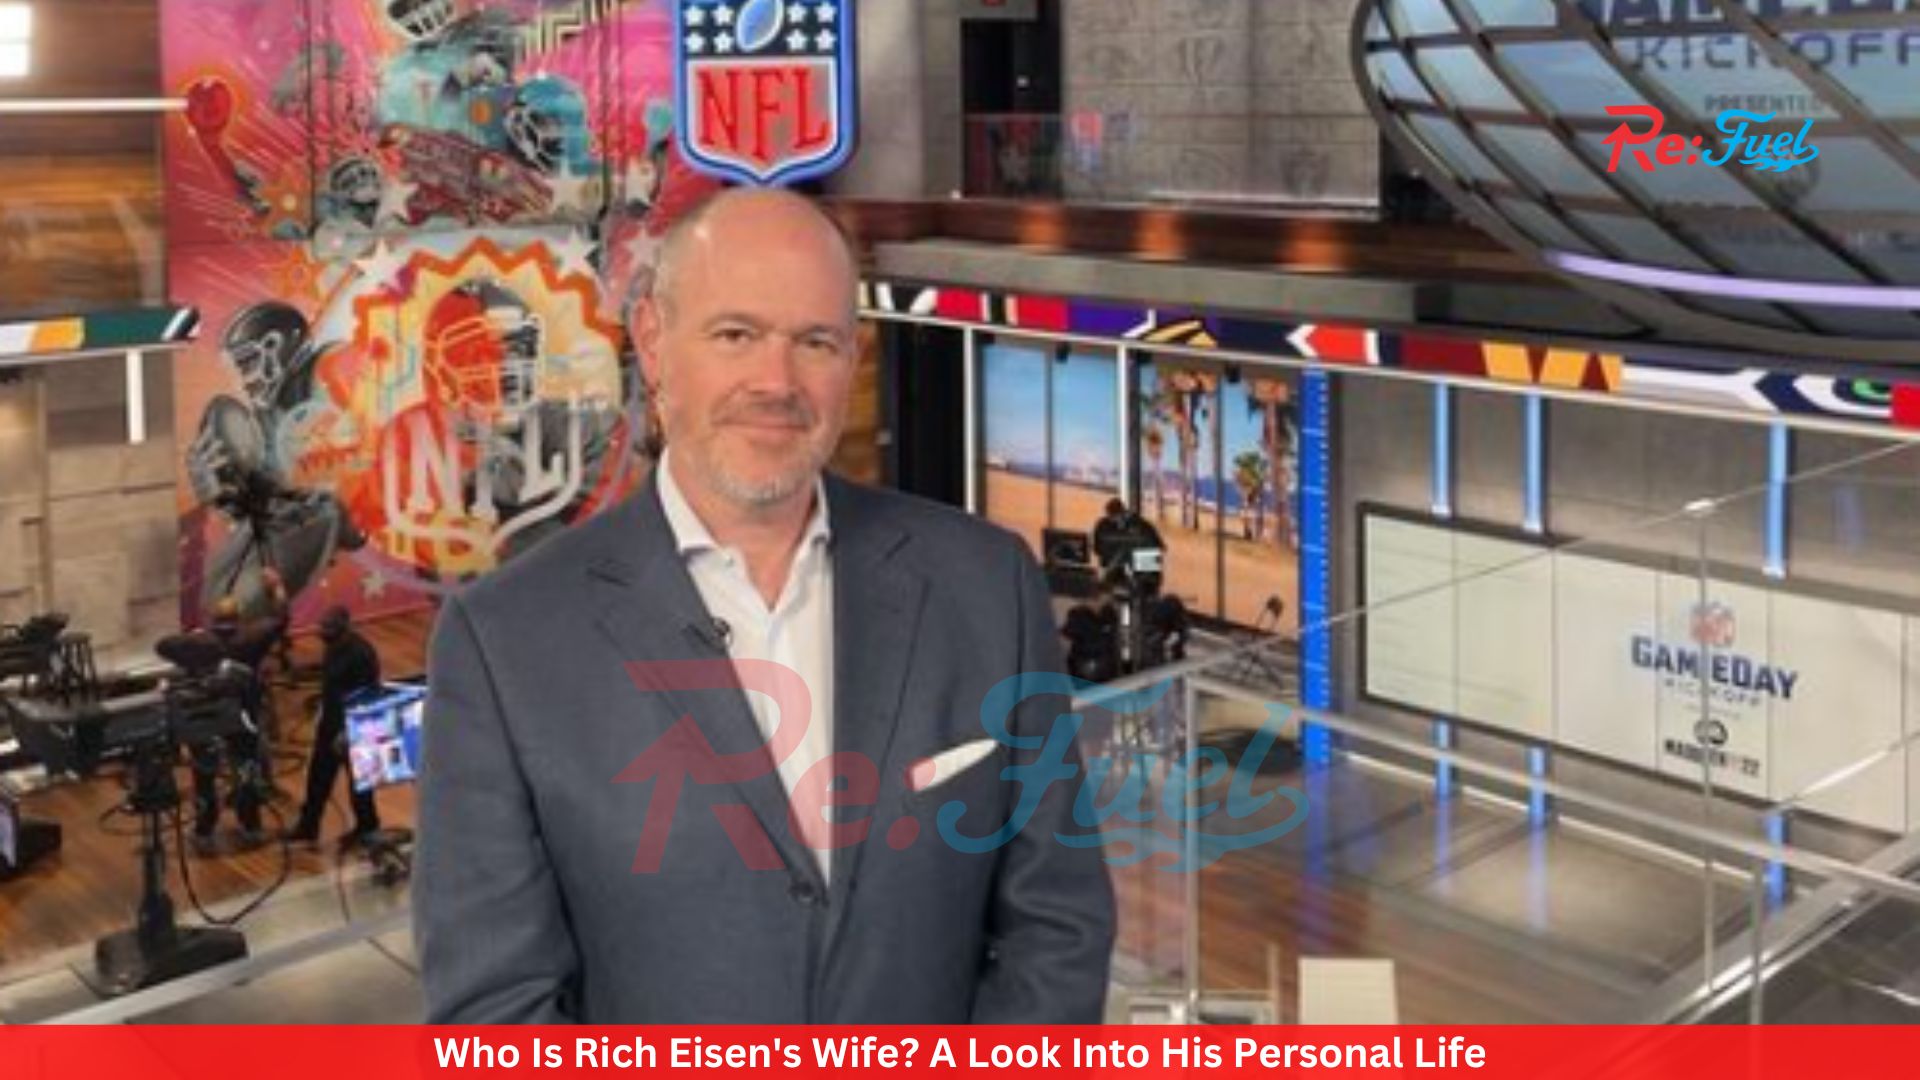 Who Is Rich Eisen's Wife? A Look Into His Personal Life